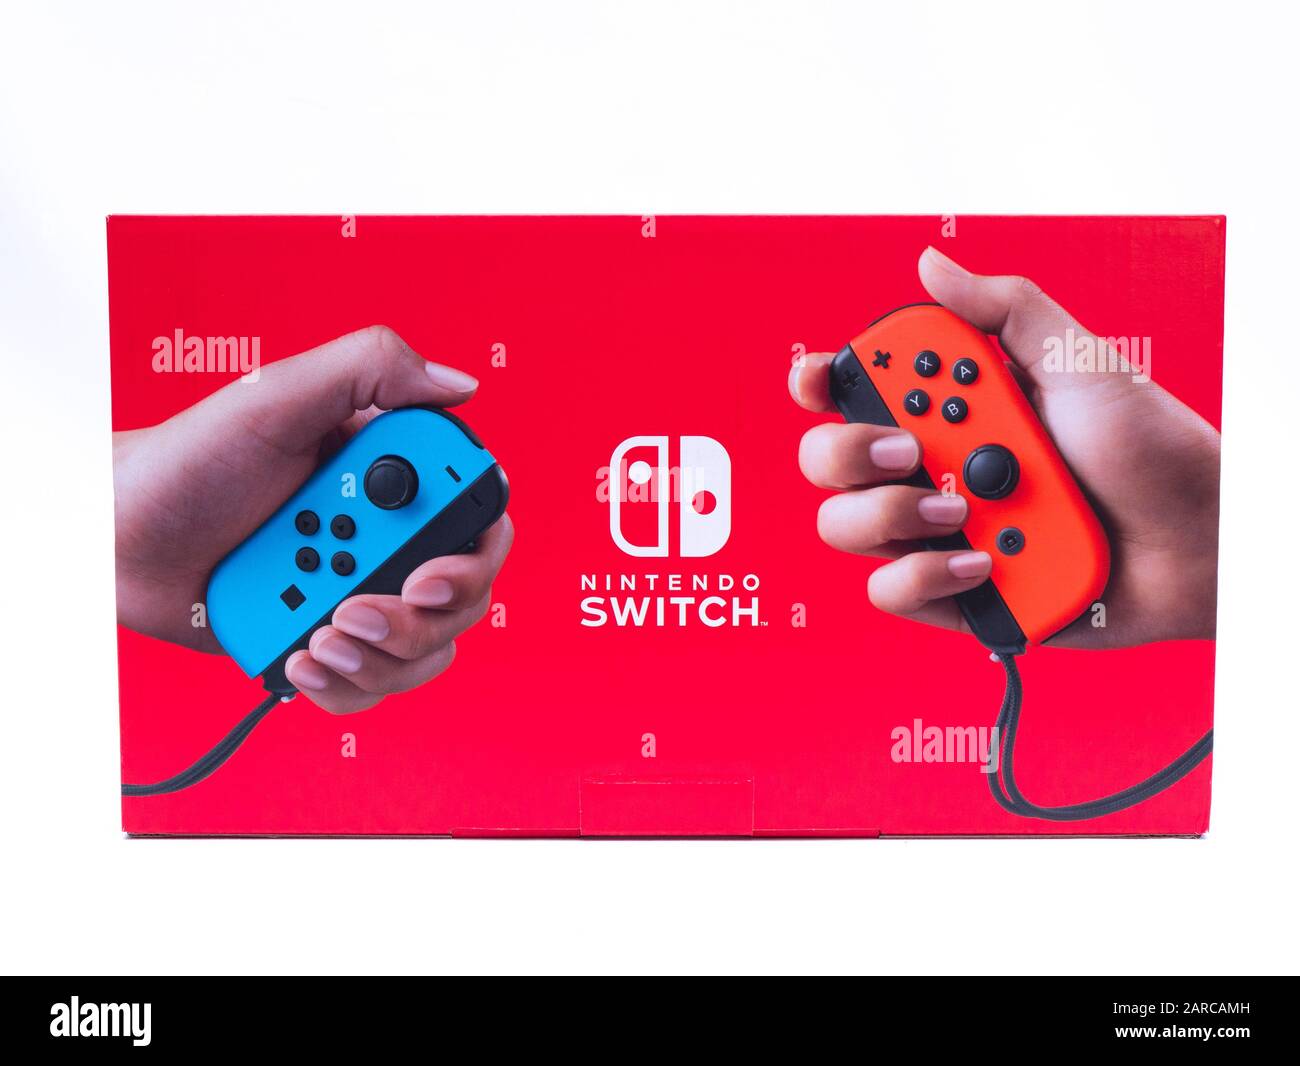 Nintendo switch Cut Out Stock Images & Pictures - Alamy